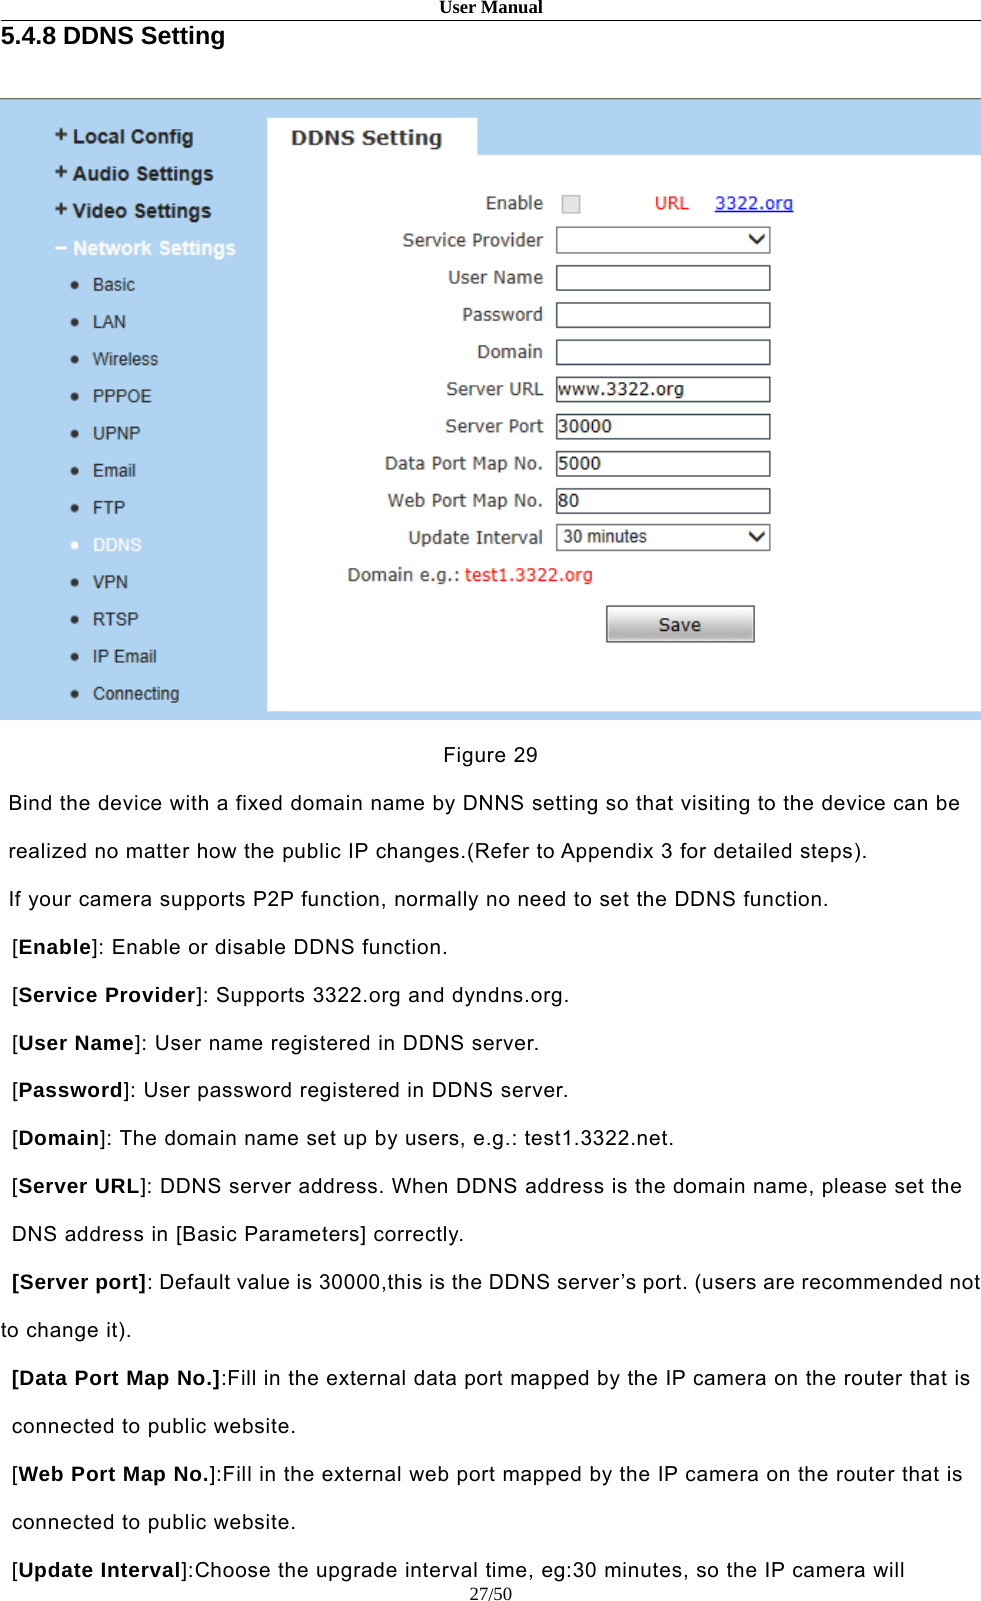 User Manual27/505.4.8 DDNS SettingFigure 29Bind the device with a fixed domain name by DNNS setting so that visiting to the device can berealized no matter how the public IP changes.(Refer to Appendix 3 for detailed steps).If your camera supports P2P function, normally no need to set the DDNS function.[Enable]: Enable or disable DDNS function.[Service Provider]: Supports 3322.org and dyndns.org.[User Name]: User name registered in DDNS server.[Password]: User password registered in DDNS server.[Domain]: The domain name set up by users, e.g.: test1.3322.net.[Server URL]: DDNS server address. When DDNS address is the domain name, please set theDNS address in [Basic Parameters] correctly.[Server port]: Default value is 30000,this is the DDNS server’s port. (users are recommended notto change it).[Data Port Map No.]:Fill in the external data port mapped by the IP camera on the router that isconnected to public website.[Web Port Map No.]:Fill in the external web port mapped by the IP camera on the router that isconnected to public website.[Update Interval]:Choose the upgrade interval time, eg:30 minutes, so the IP camera will